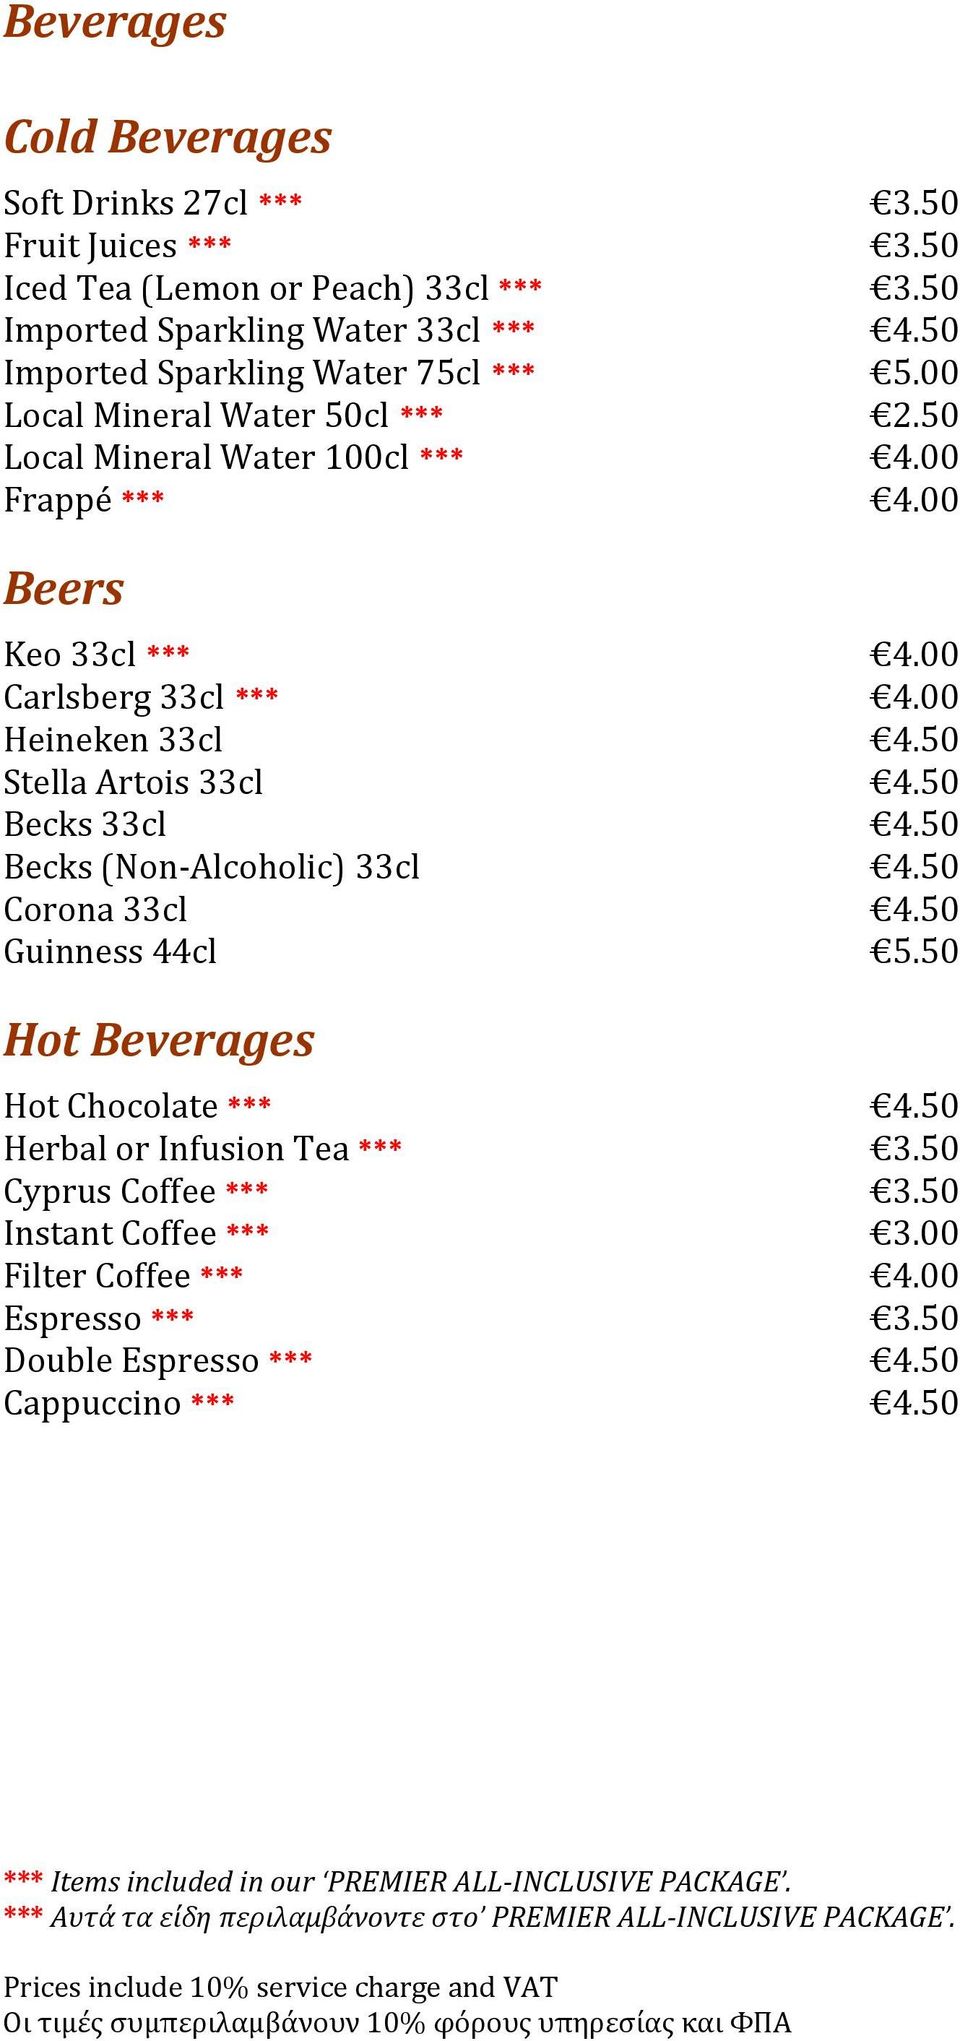 50 Stella Artois 33cl 4.50 Becks 33cl 4.50 Becks (Non Alc oholic) 33cl 4.50 Corona 33cl 4.50 Guinness 44cl 5.50 Hot Beverages Hot Chocolate *** 4.50 Herbal or Infu sion Tea *** 3.